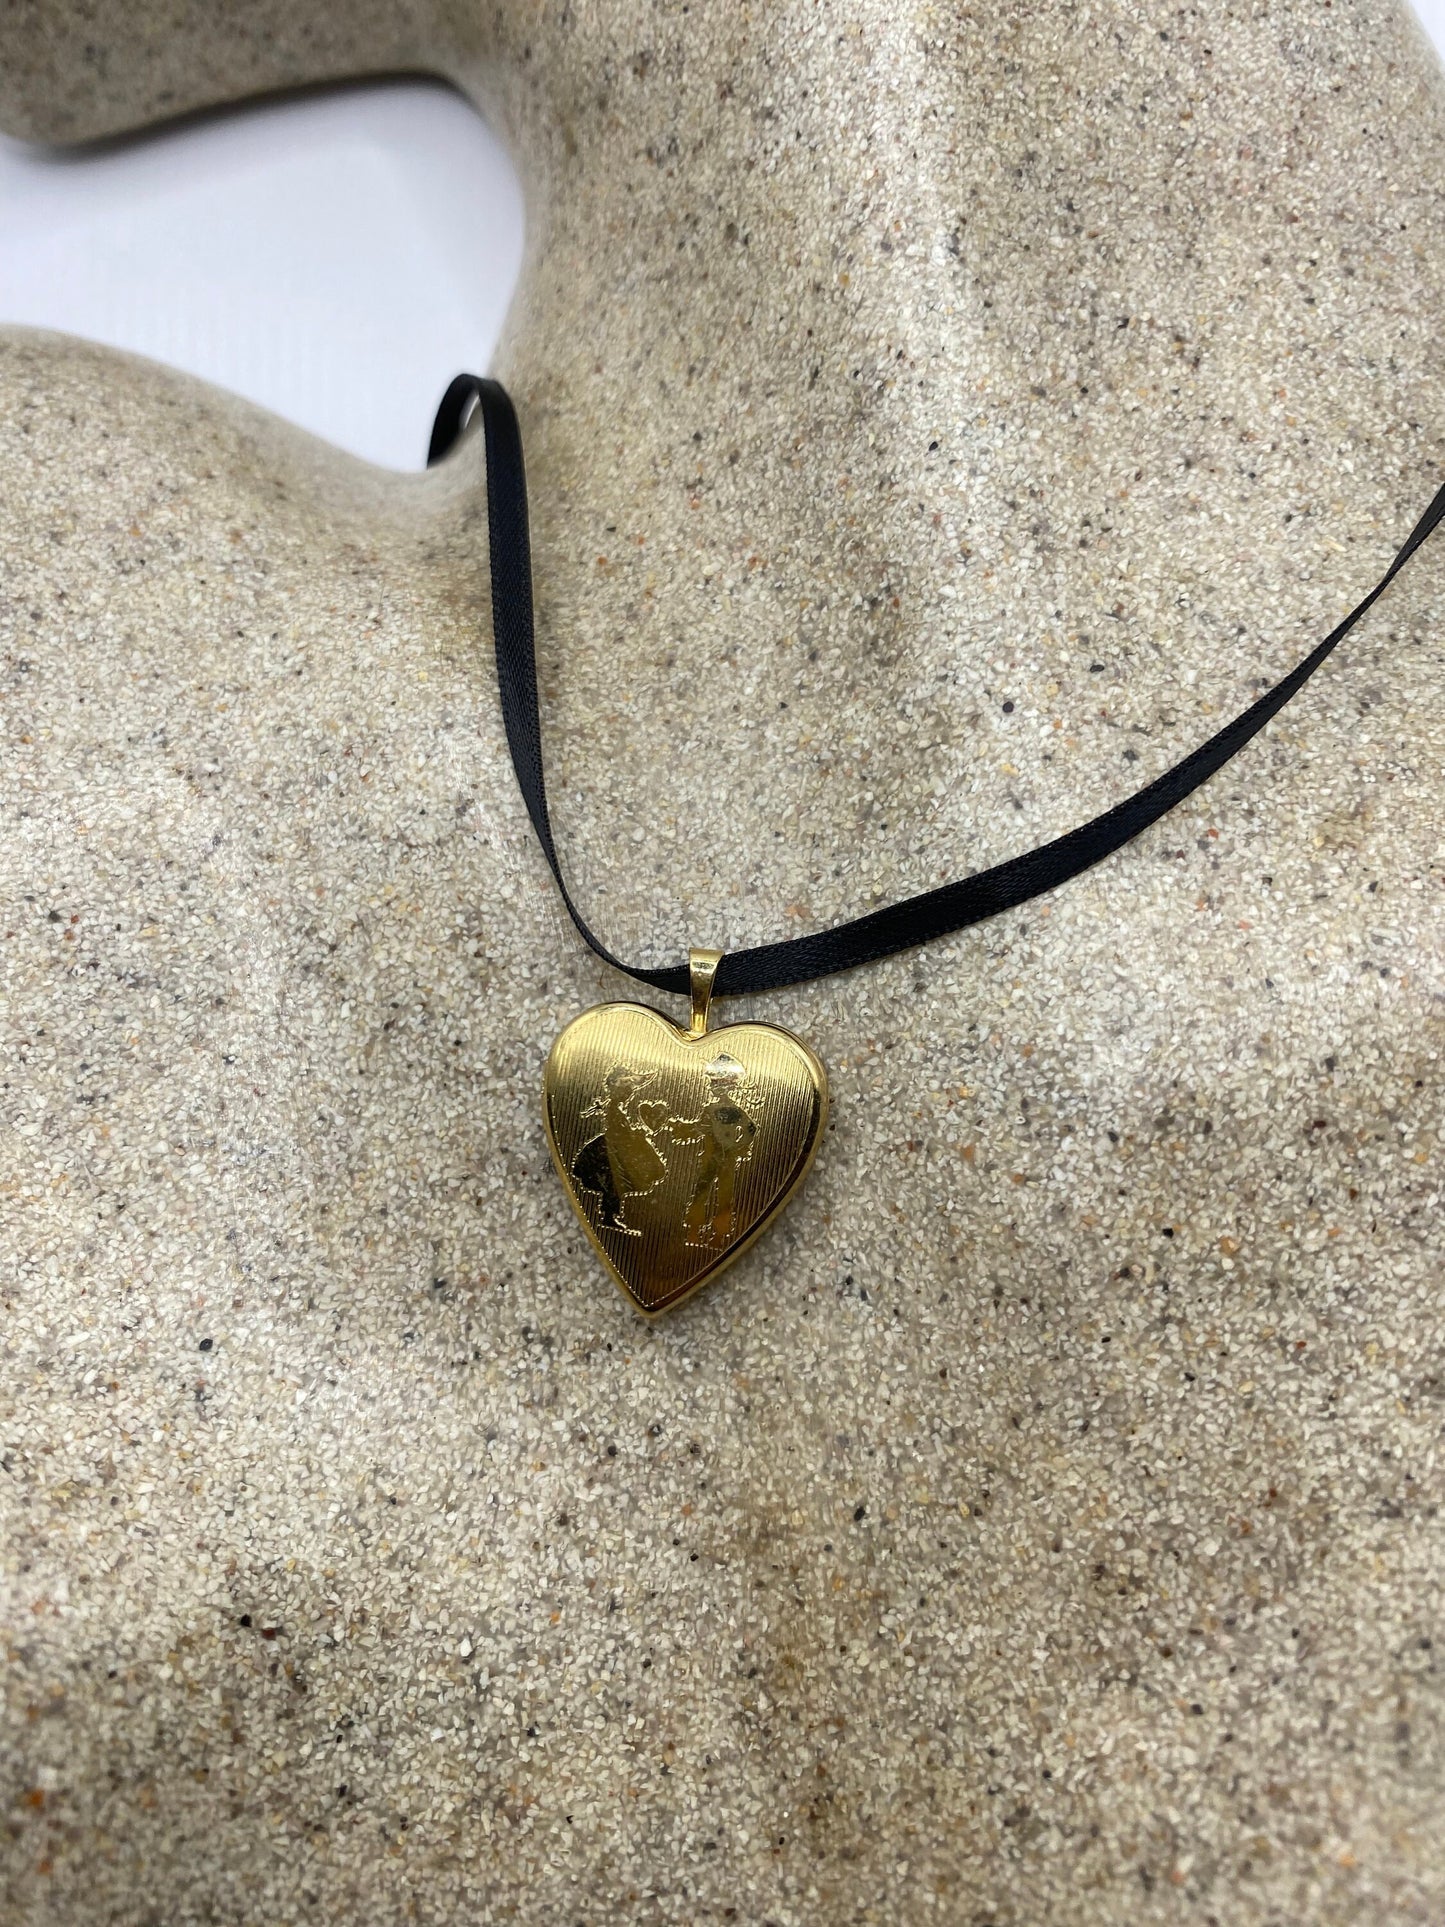 Vintage Gold Locket | Tiny Heart 9k Gold Filled Pendant Photo Memory Charm Engraved First Communion | Choker Necklace